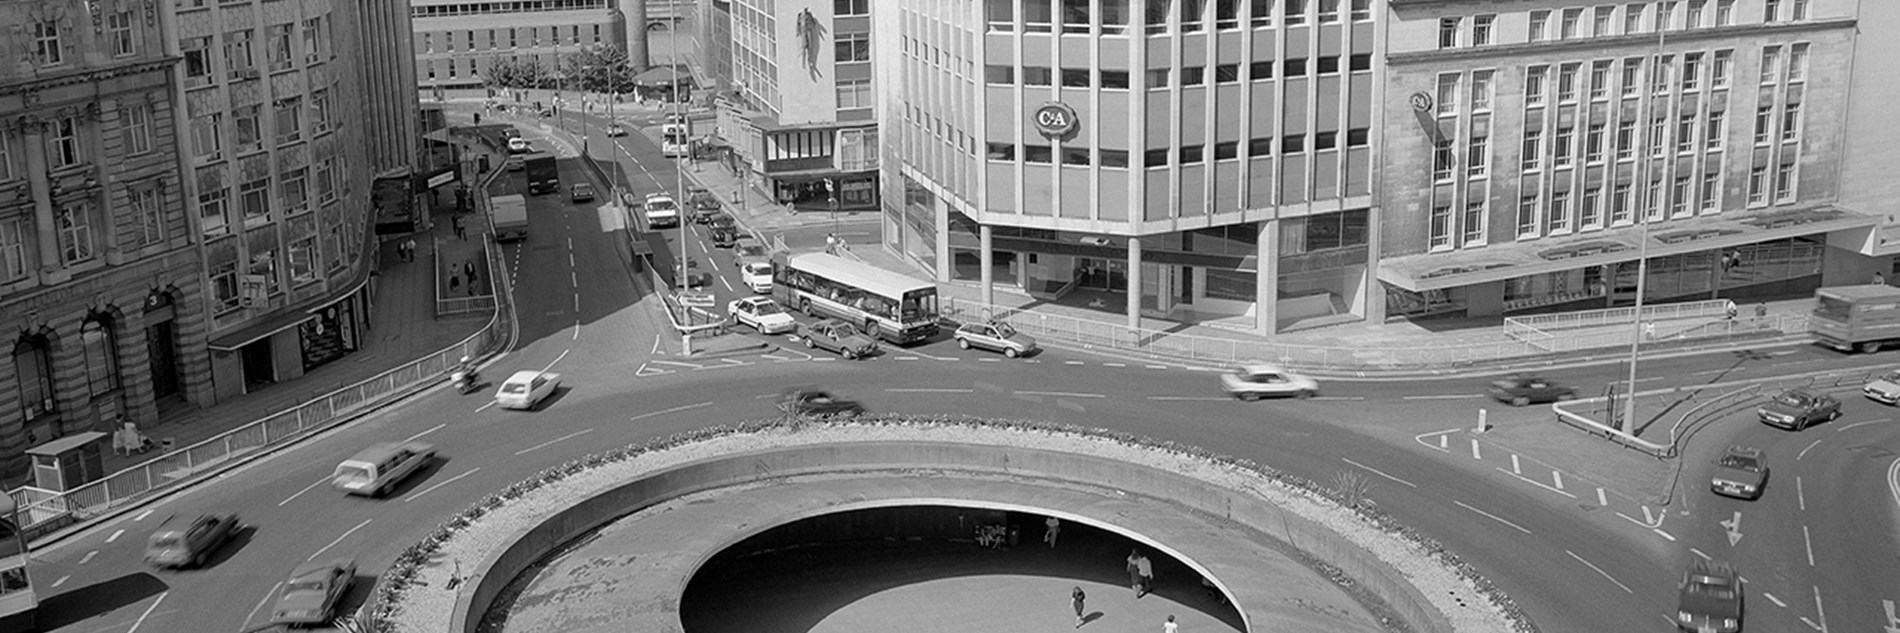 A black and white photograph of a roundabout (known as the “Hole in the Road”) with a view of Sheffield in the background. Cars and buses are driving round the roundabout, and in the middle, below street level, there are people walking and sitting.